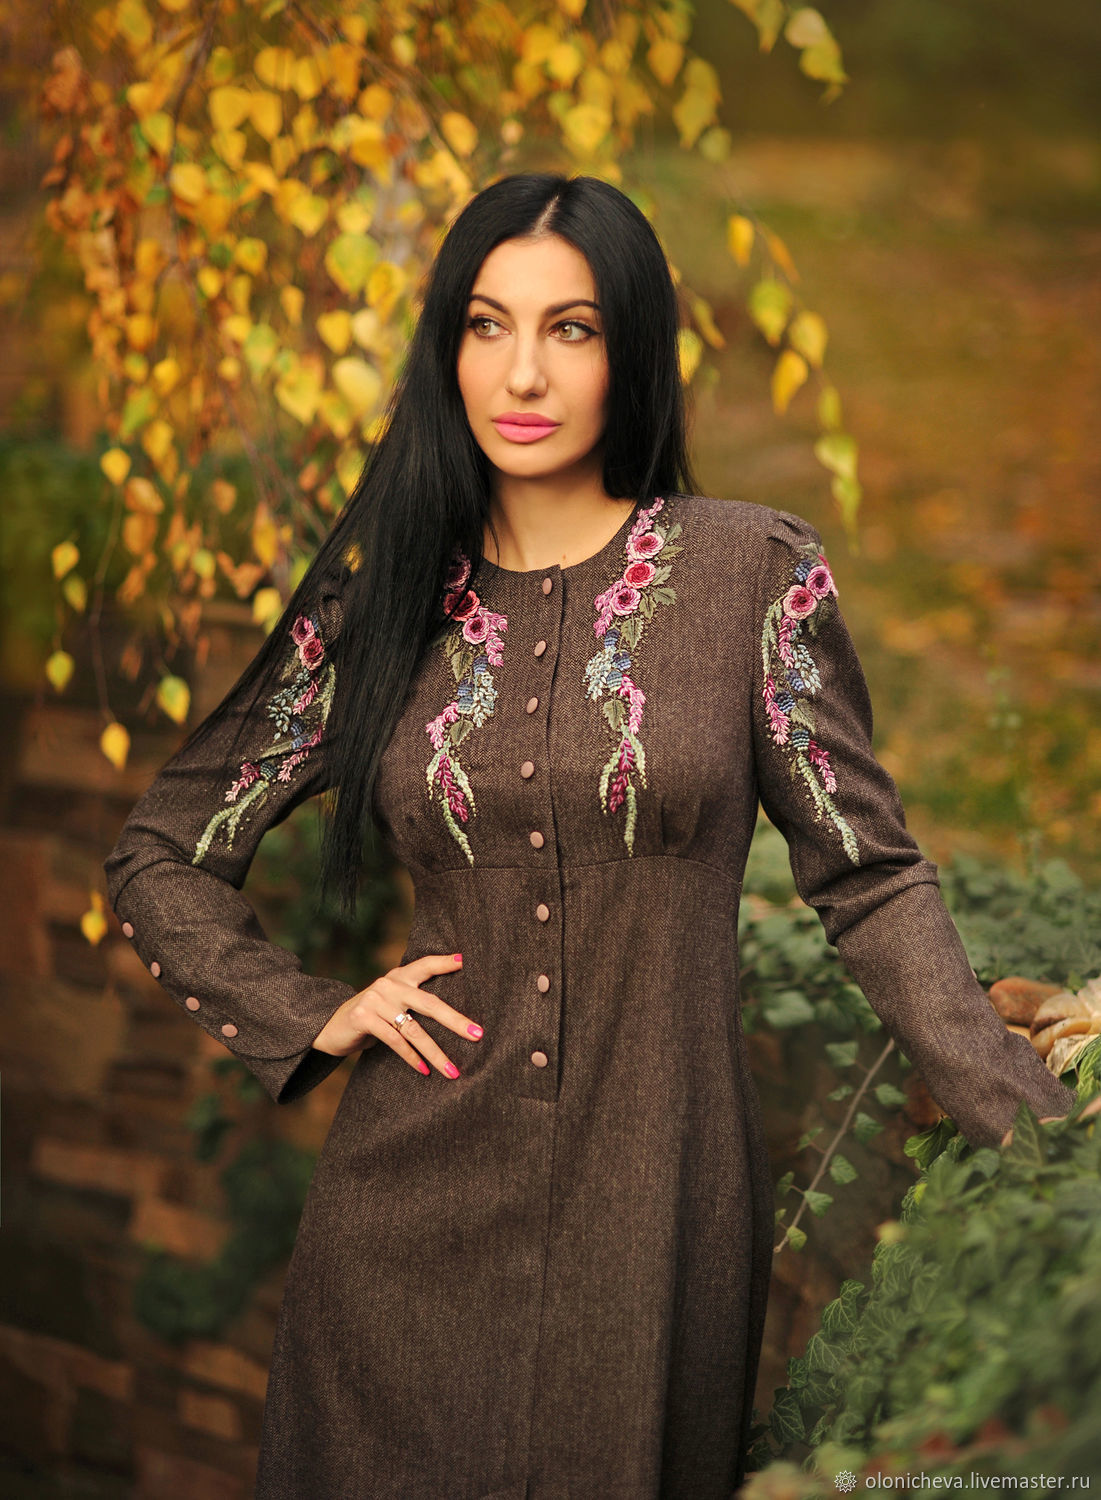 Warm dress with hand embroidery 'Monologue of autumn', Dresses, Vinnitsa,  Фото №1